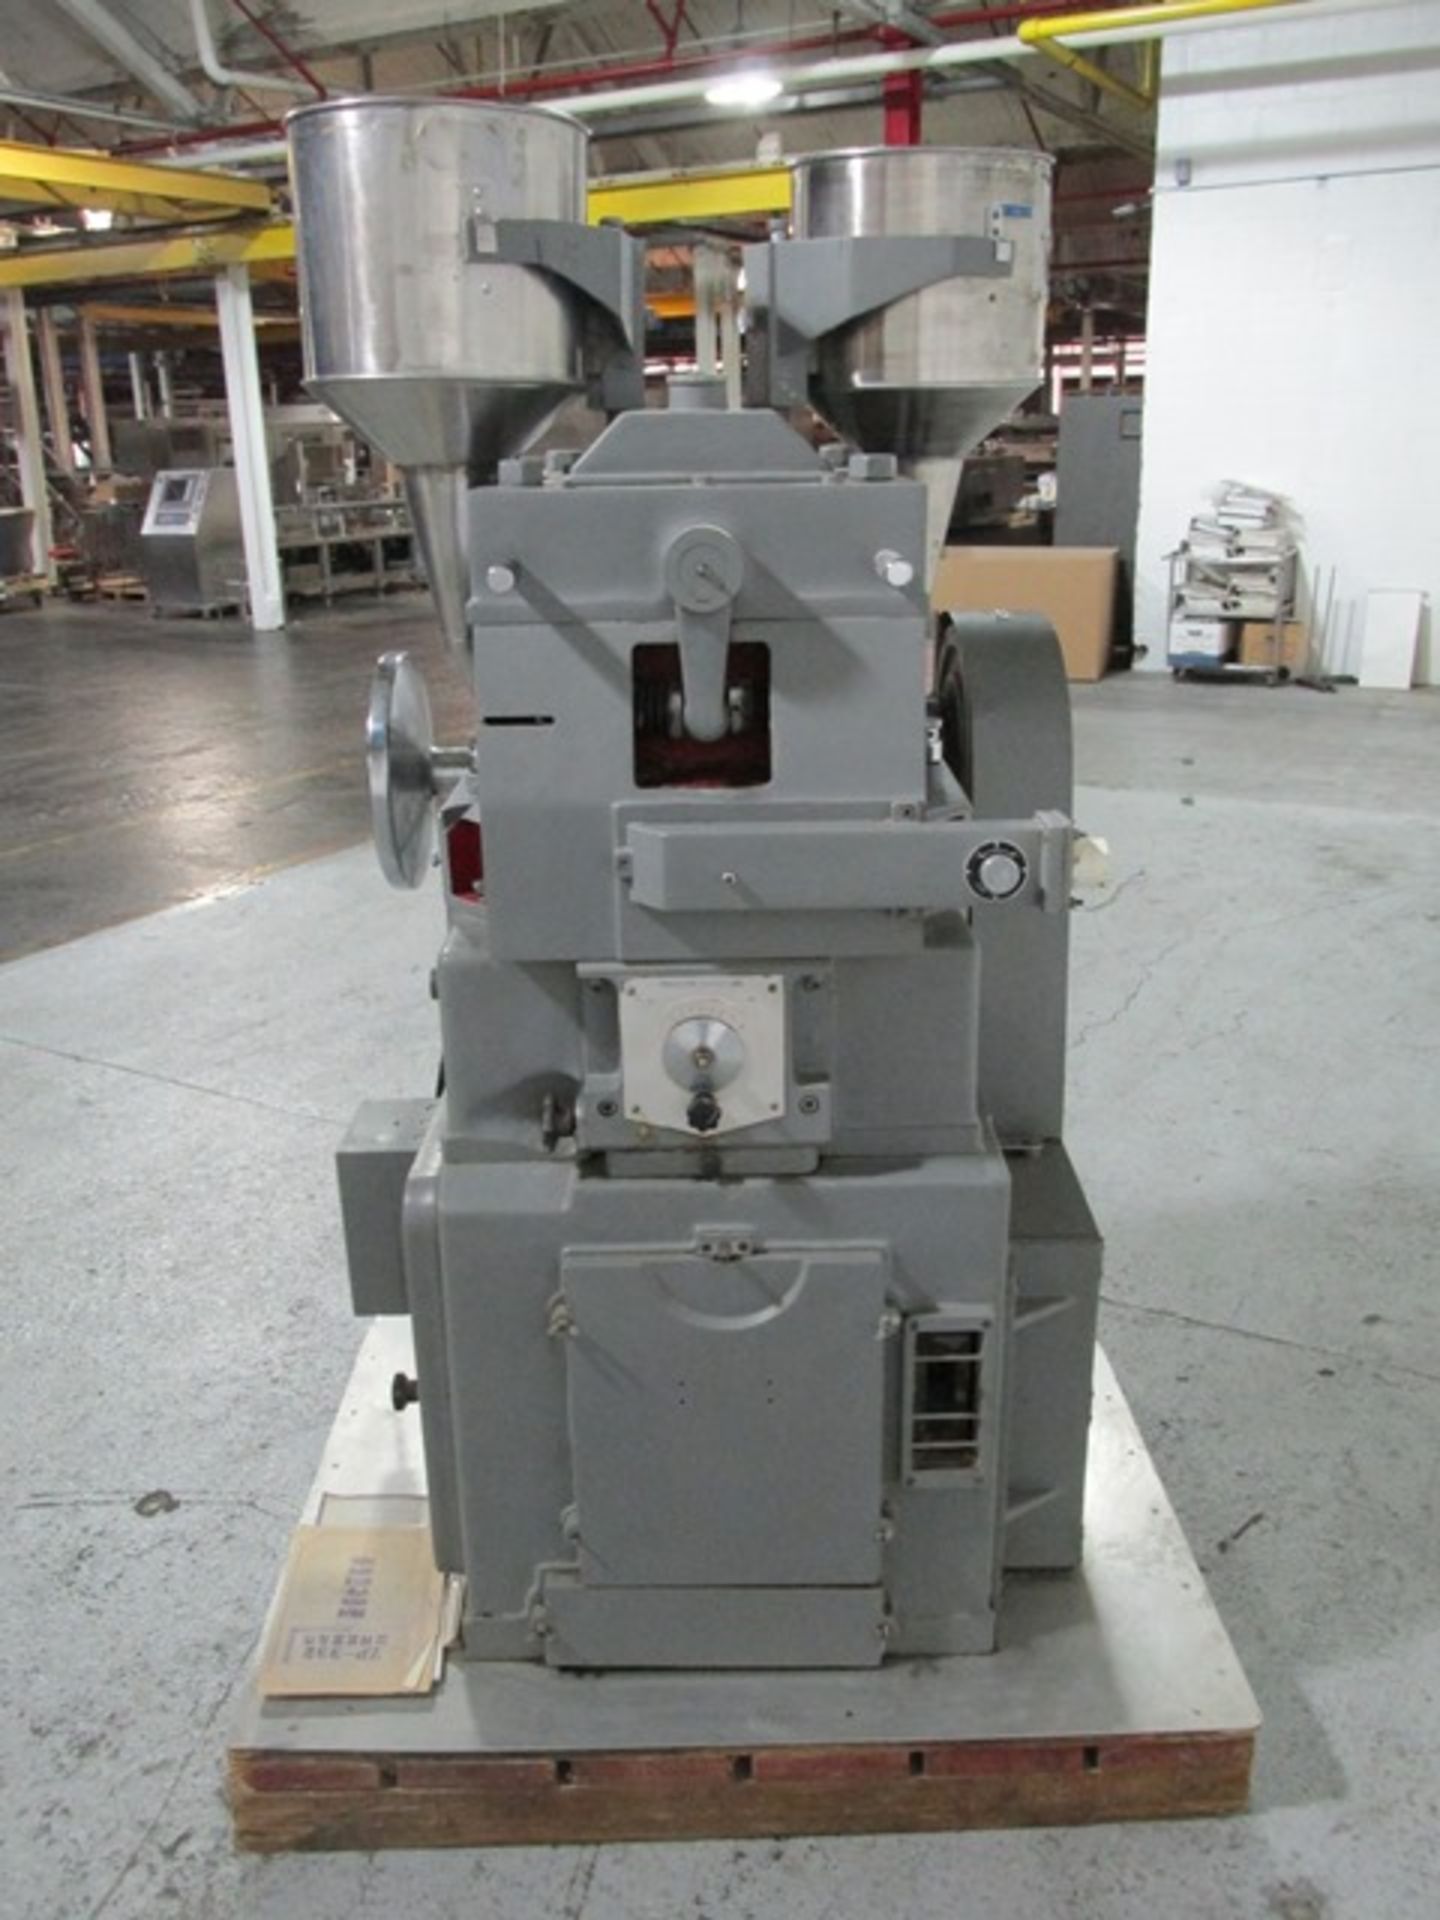 ZP rotary tablet press, model ZPY33, 33 station, 60 kn compression pressure, double sided - Image 4 of 9